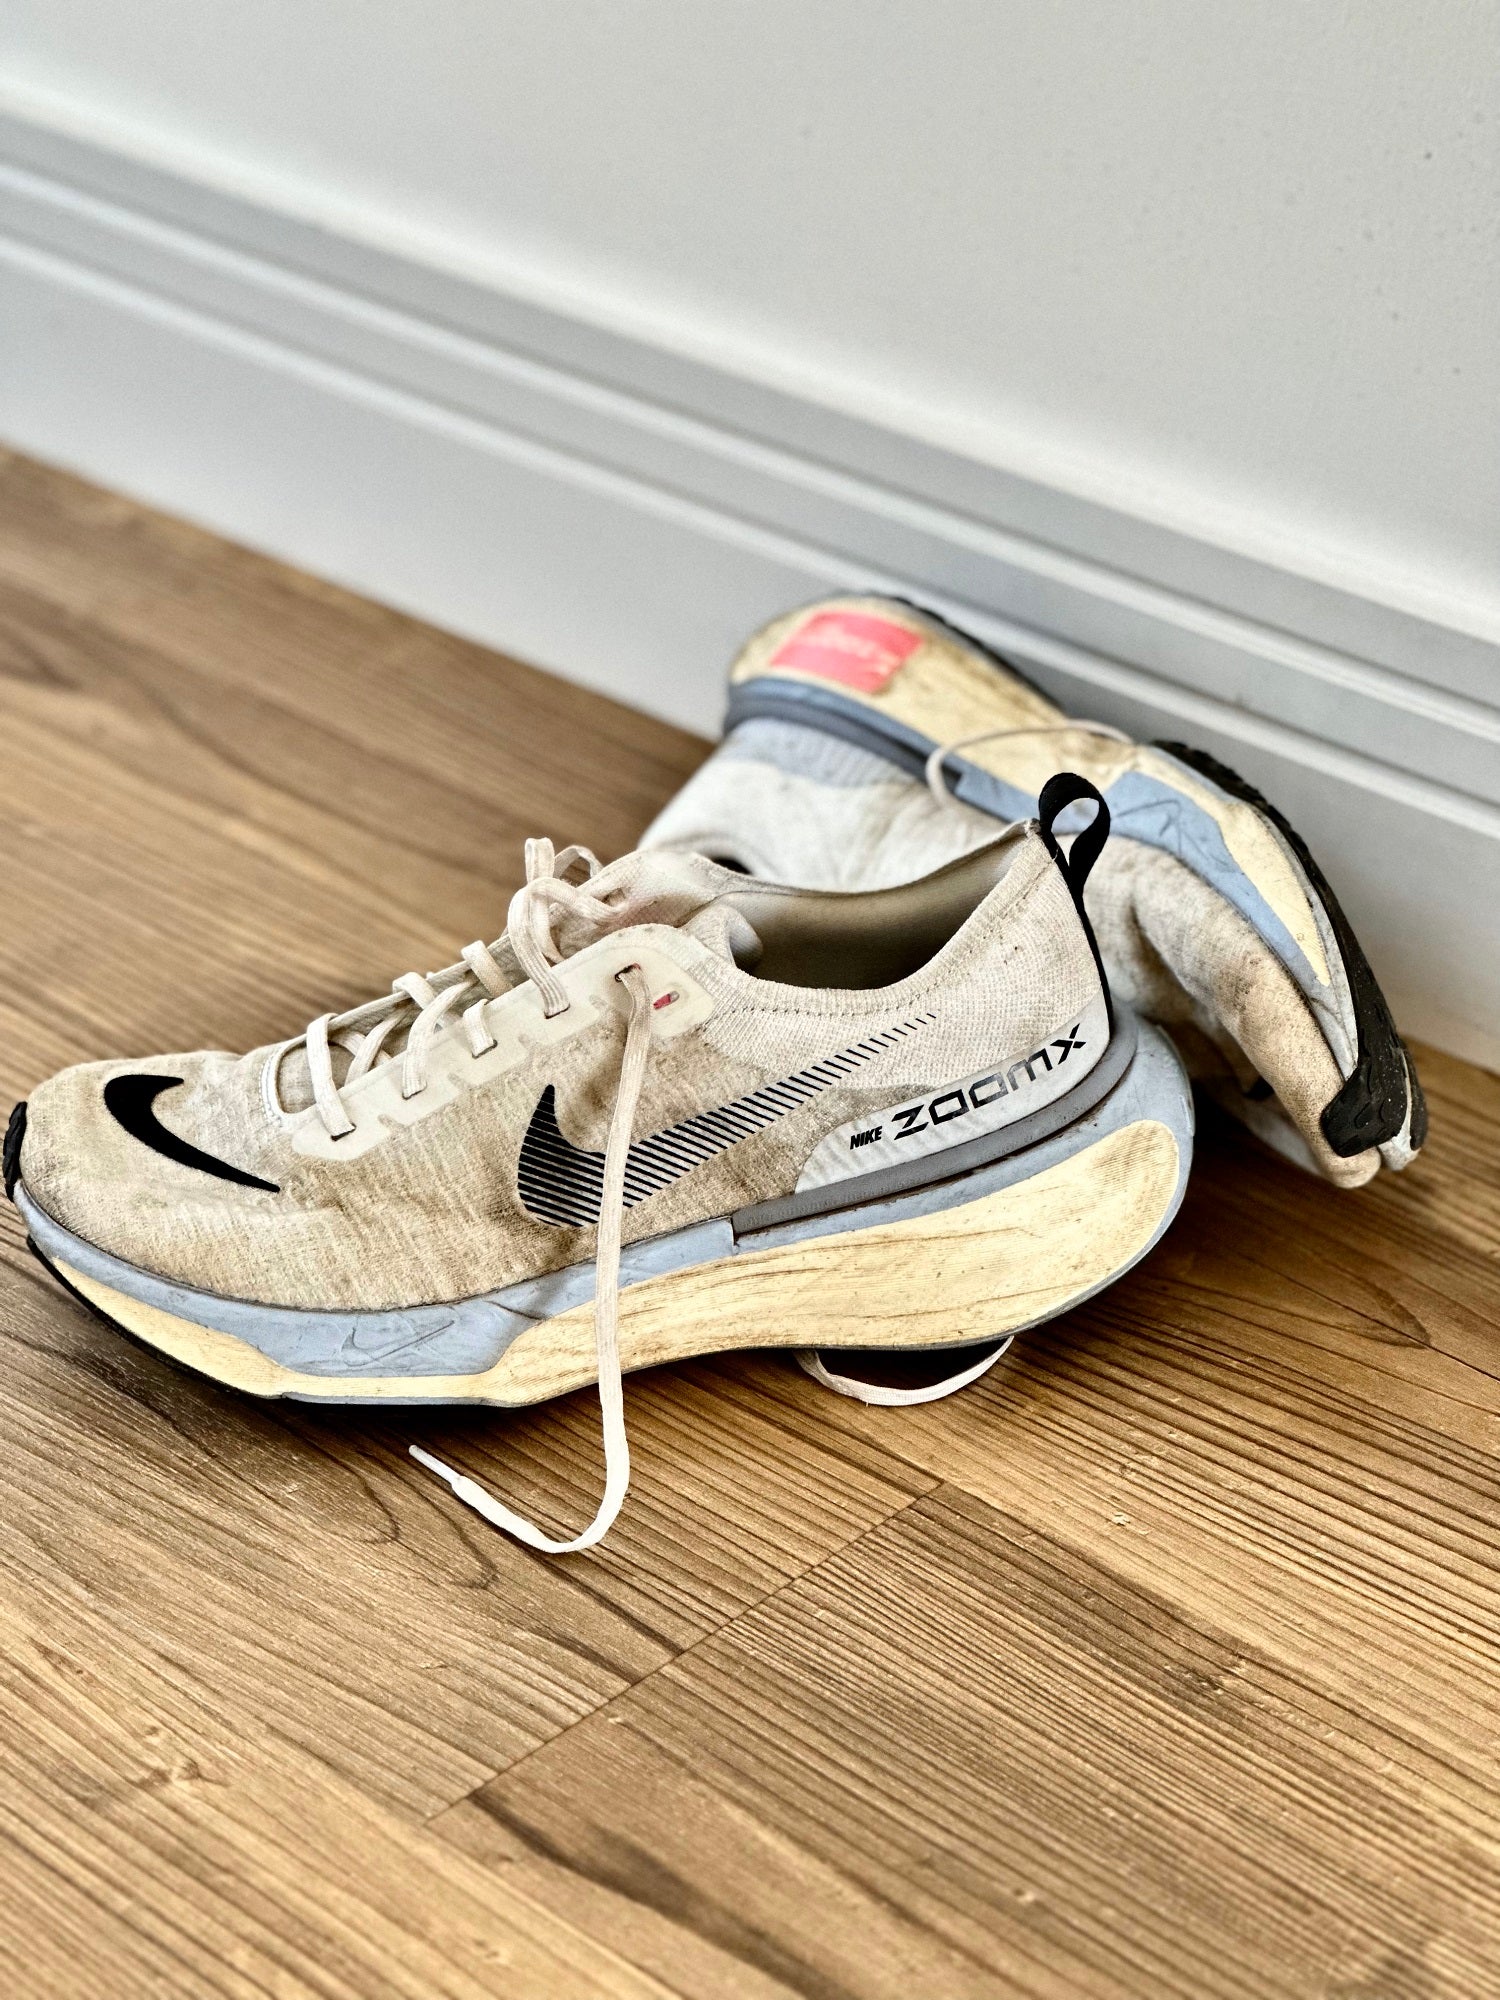 Worn pair of Nike Invincible Run running shoes on wooden floor